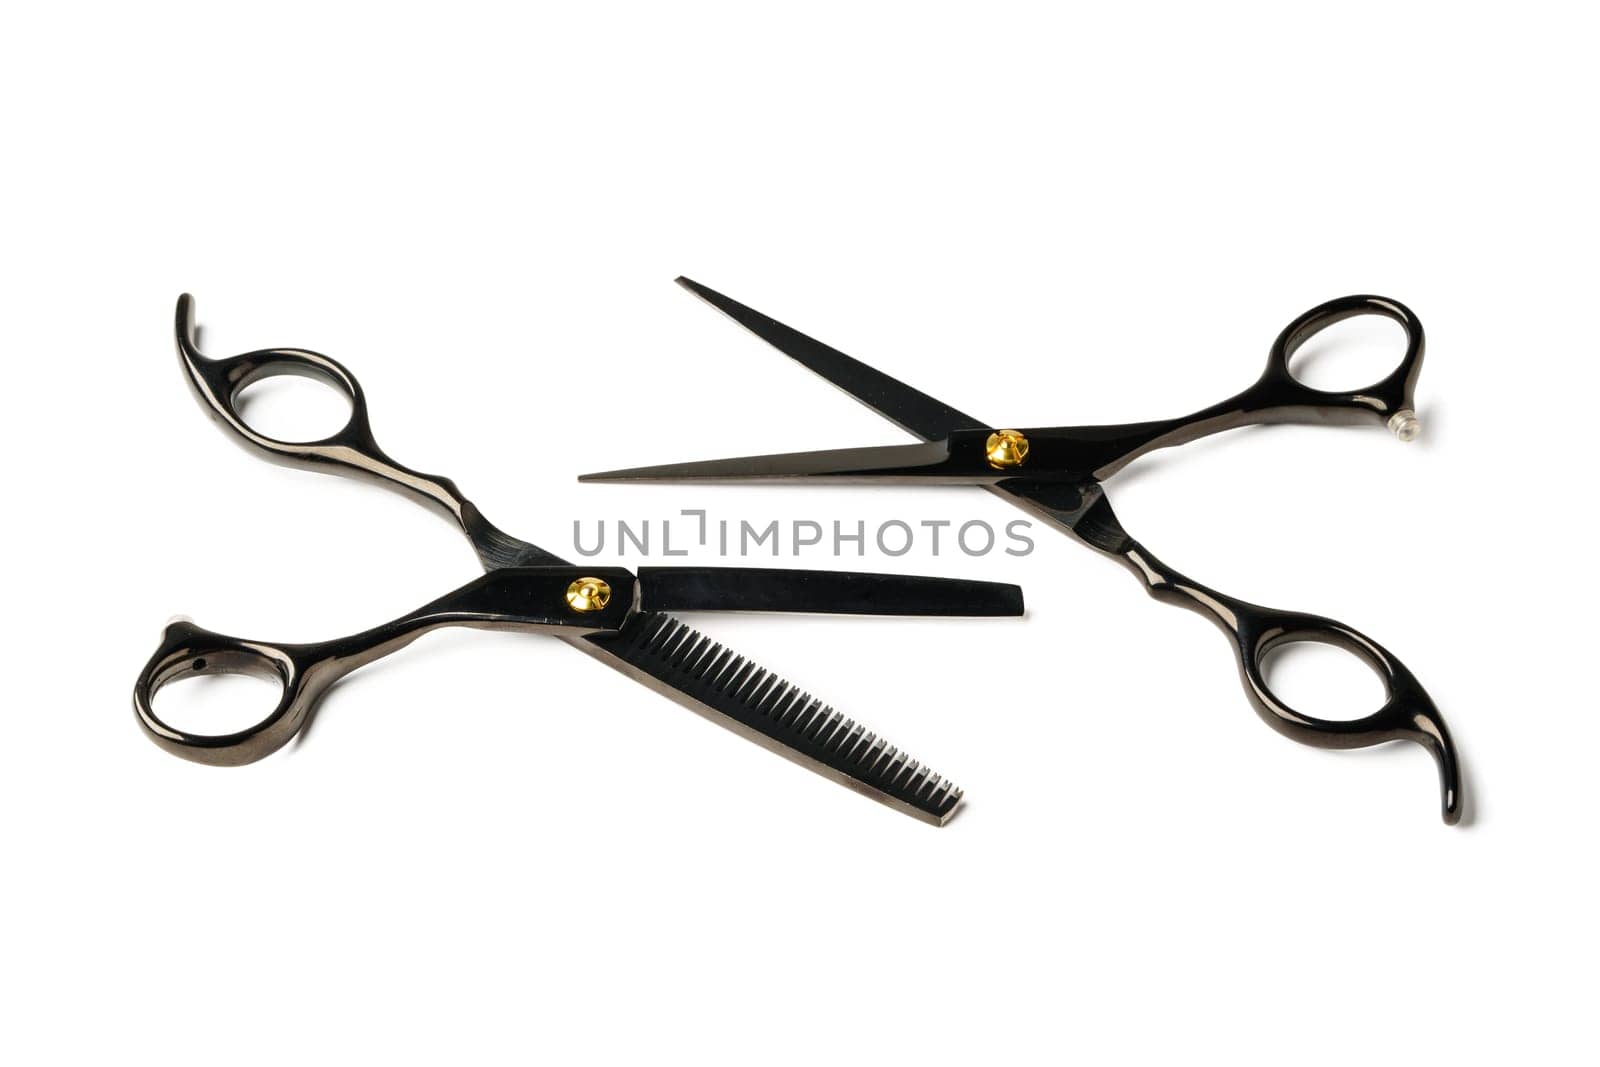 Scissors for haircuts isolated on white background close up